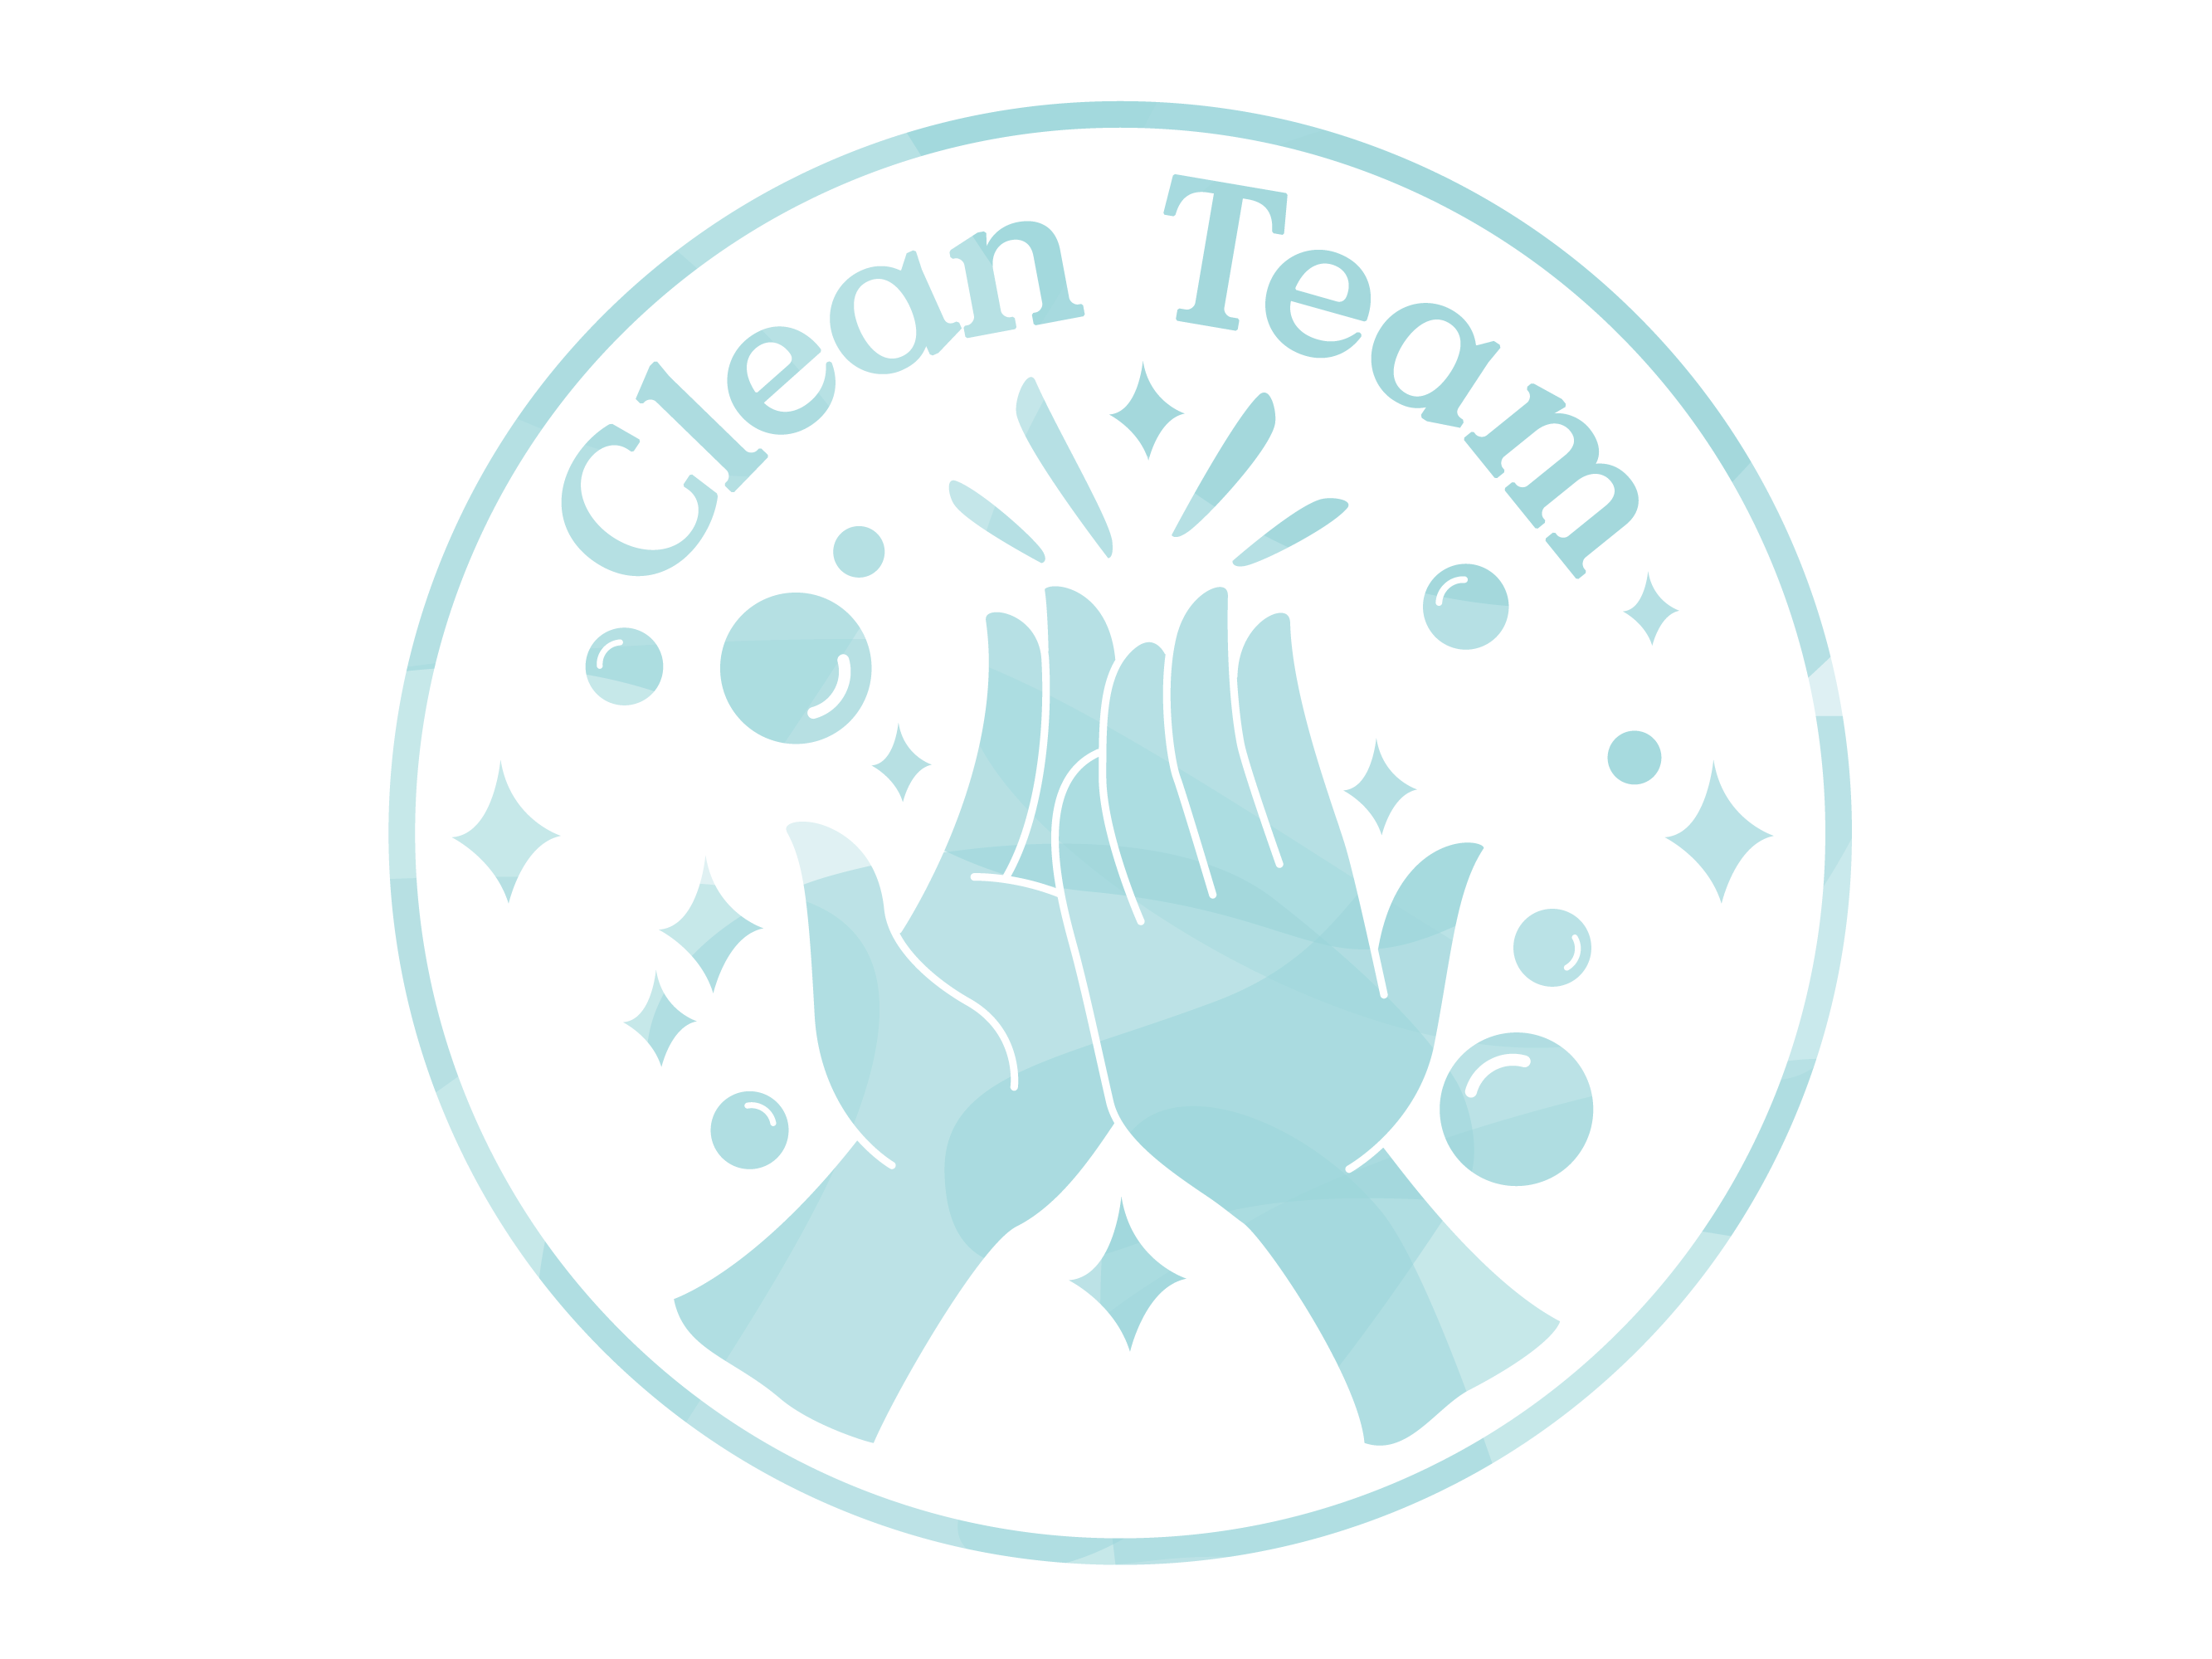 clean team logo of two hands high fiving